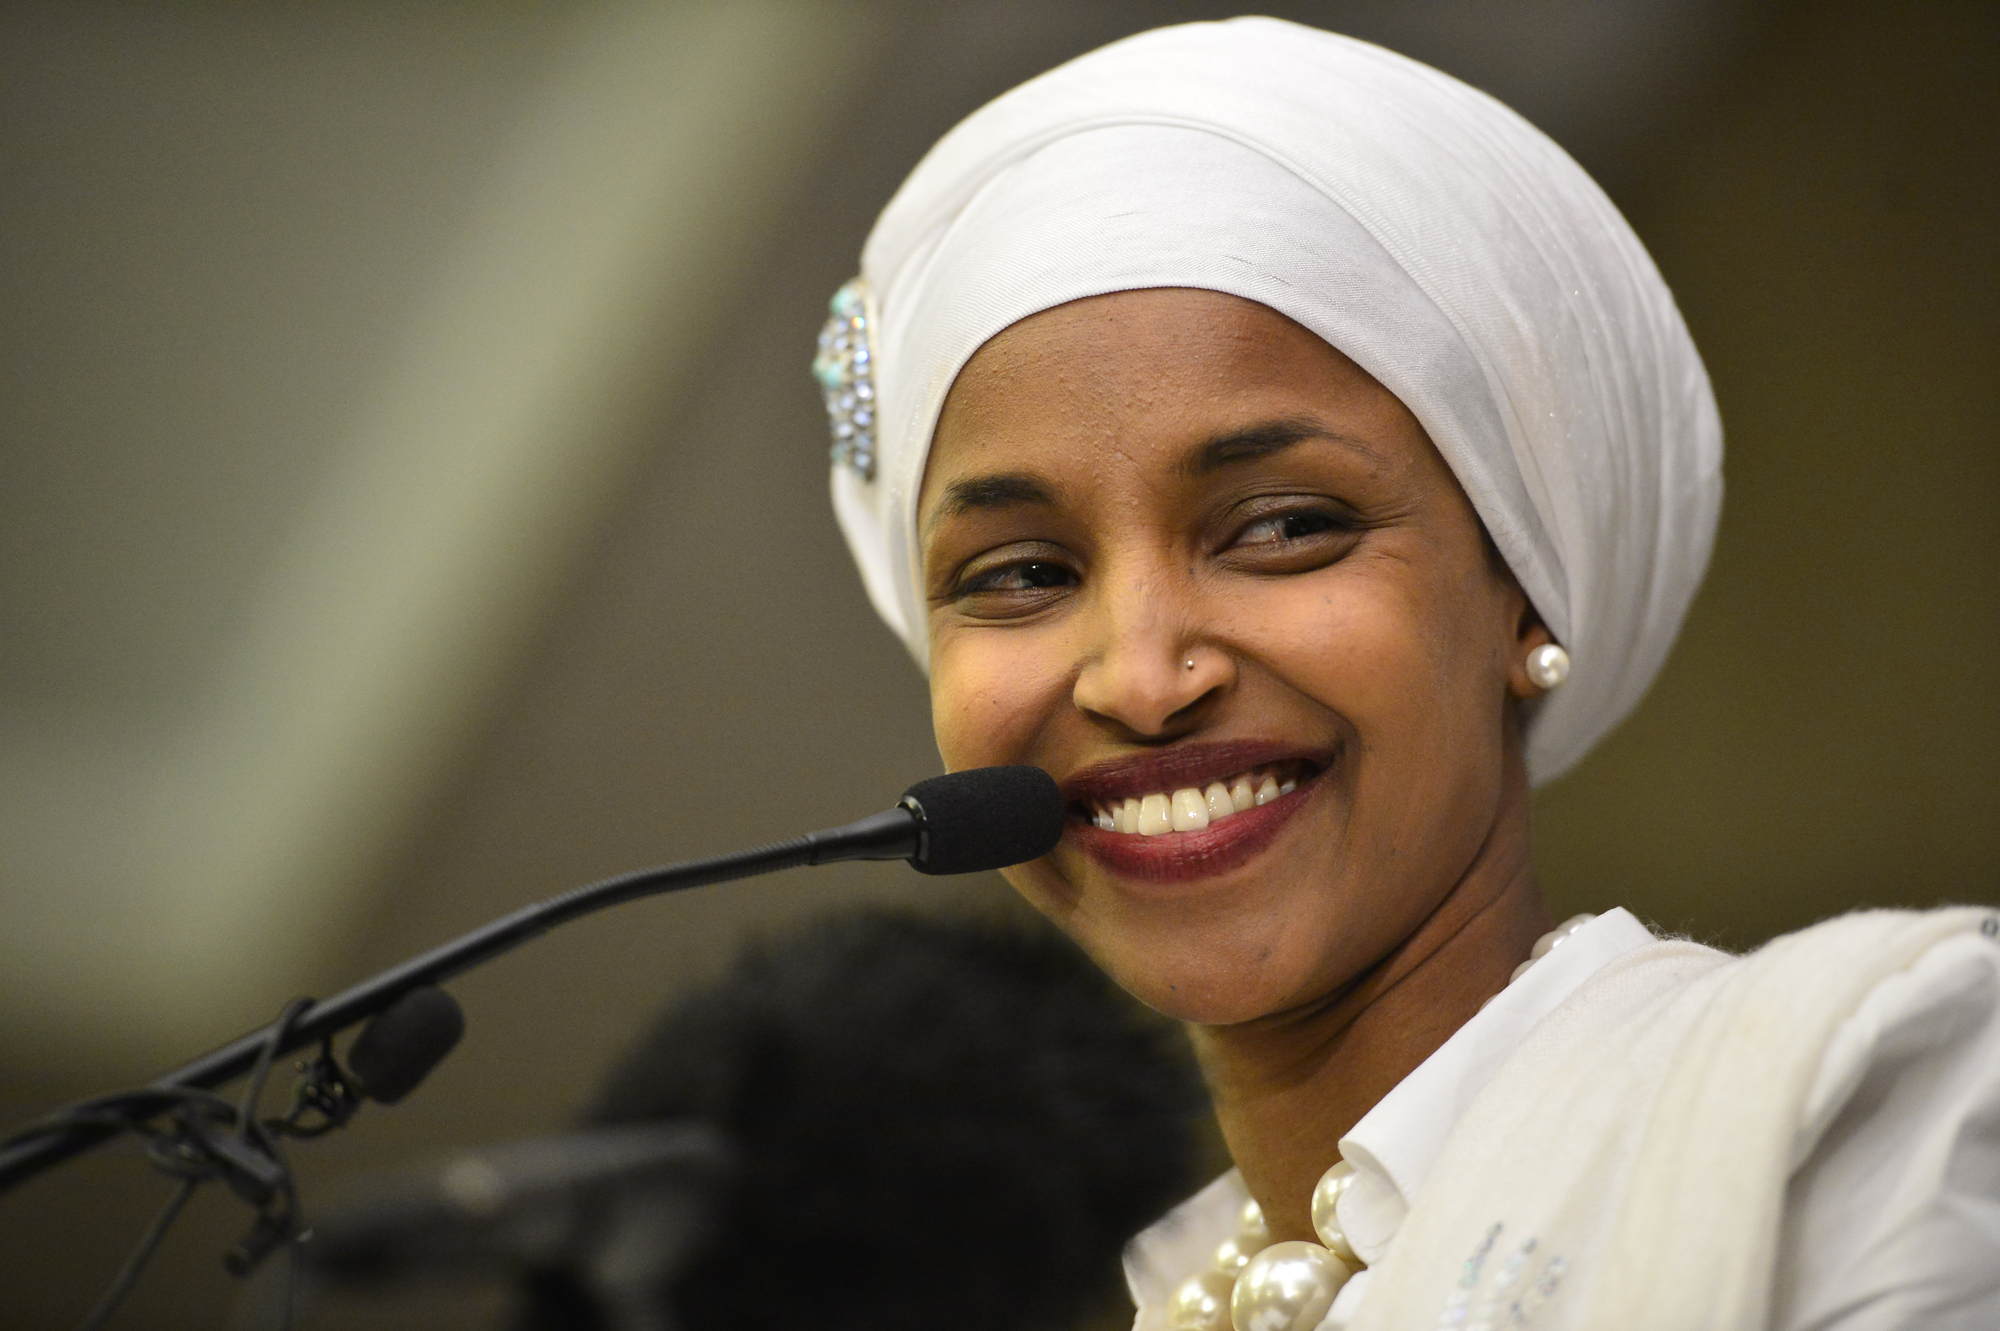 What Did Ilhan Omar Say?